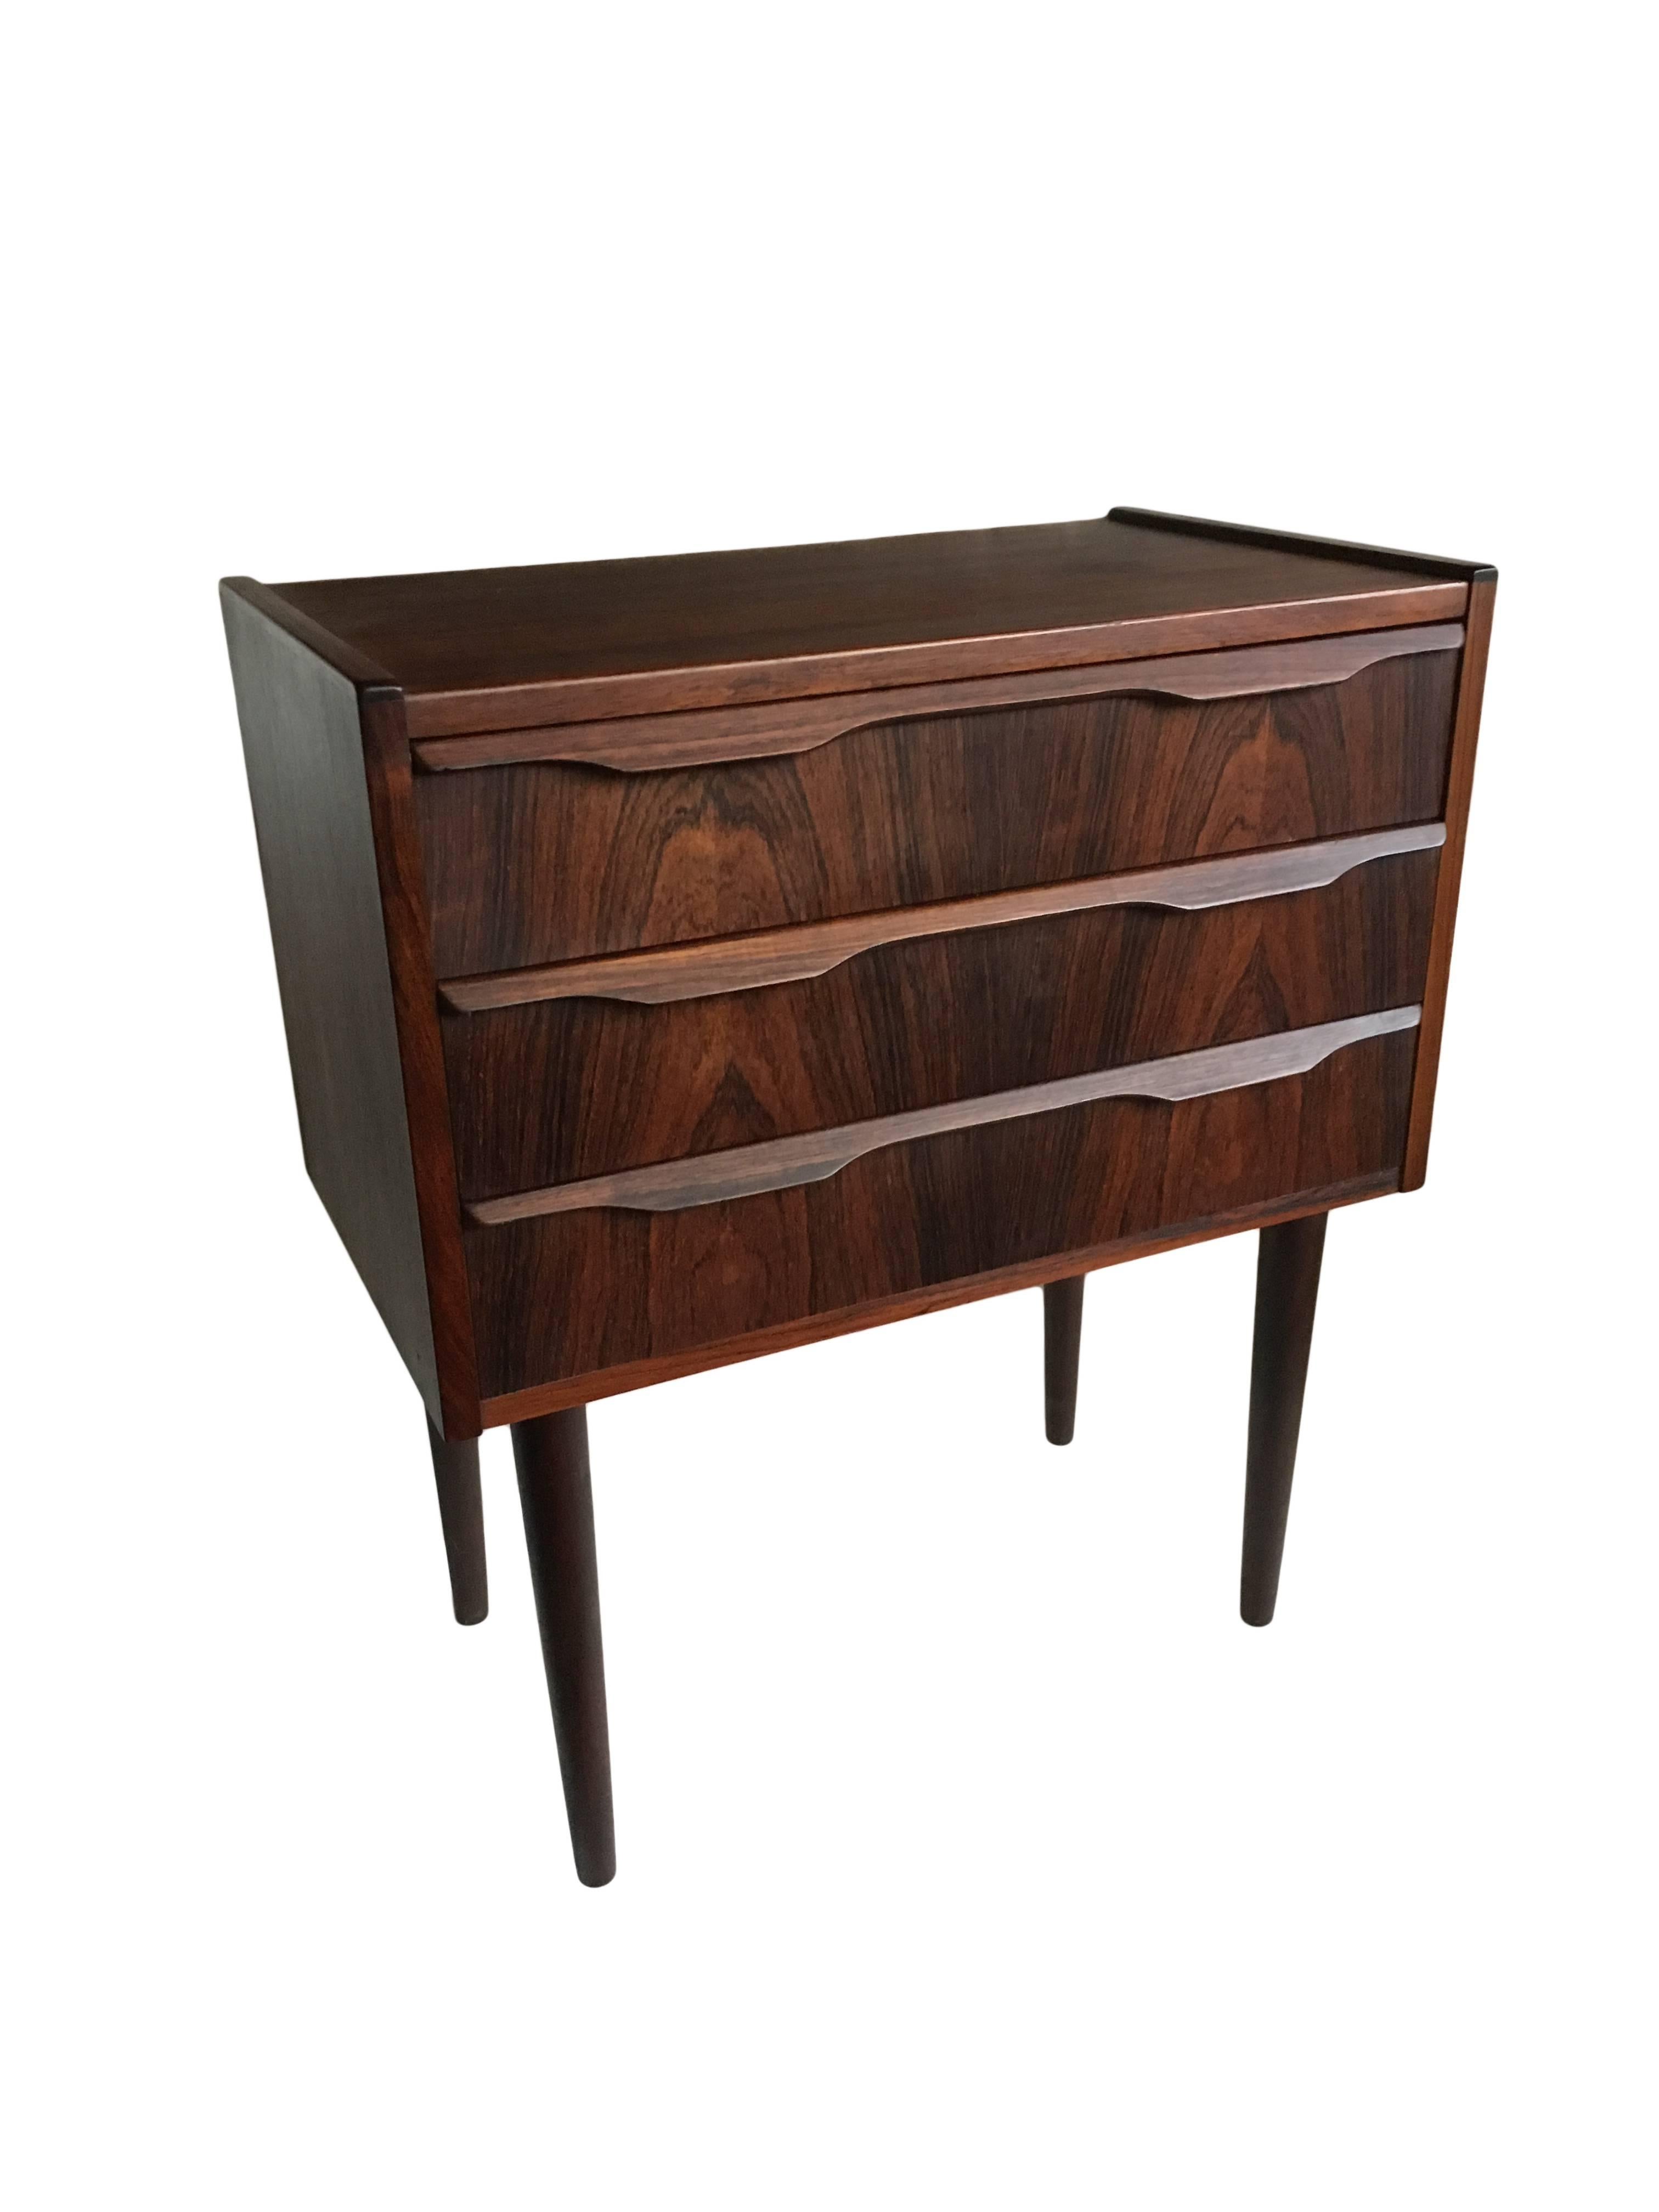 Super pair of midcentury Danish nightstands. Produced in Denmark during the early 1960s. Modernist design with lipped handles and lovely matched Santos rosewood veneers.
Great condition throughout.
 